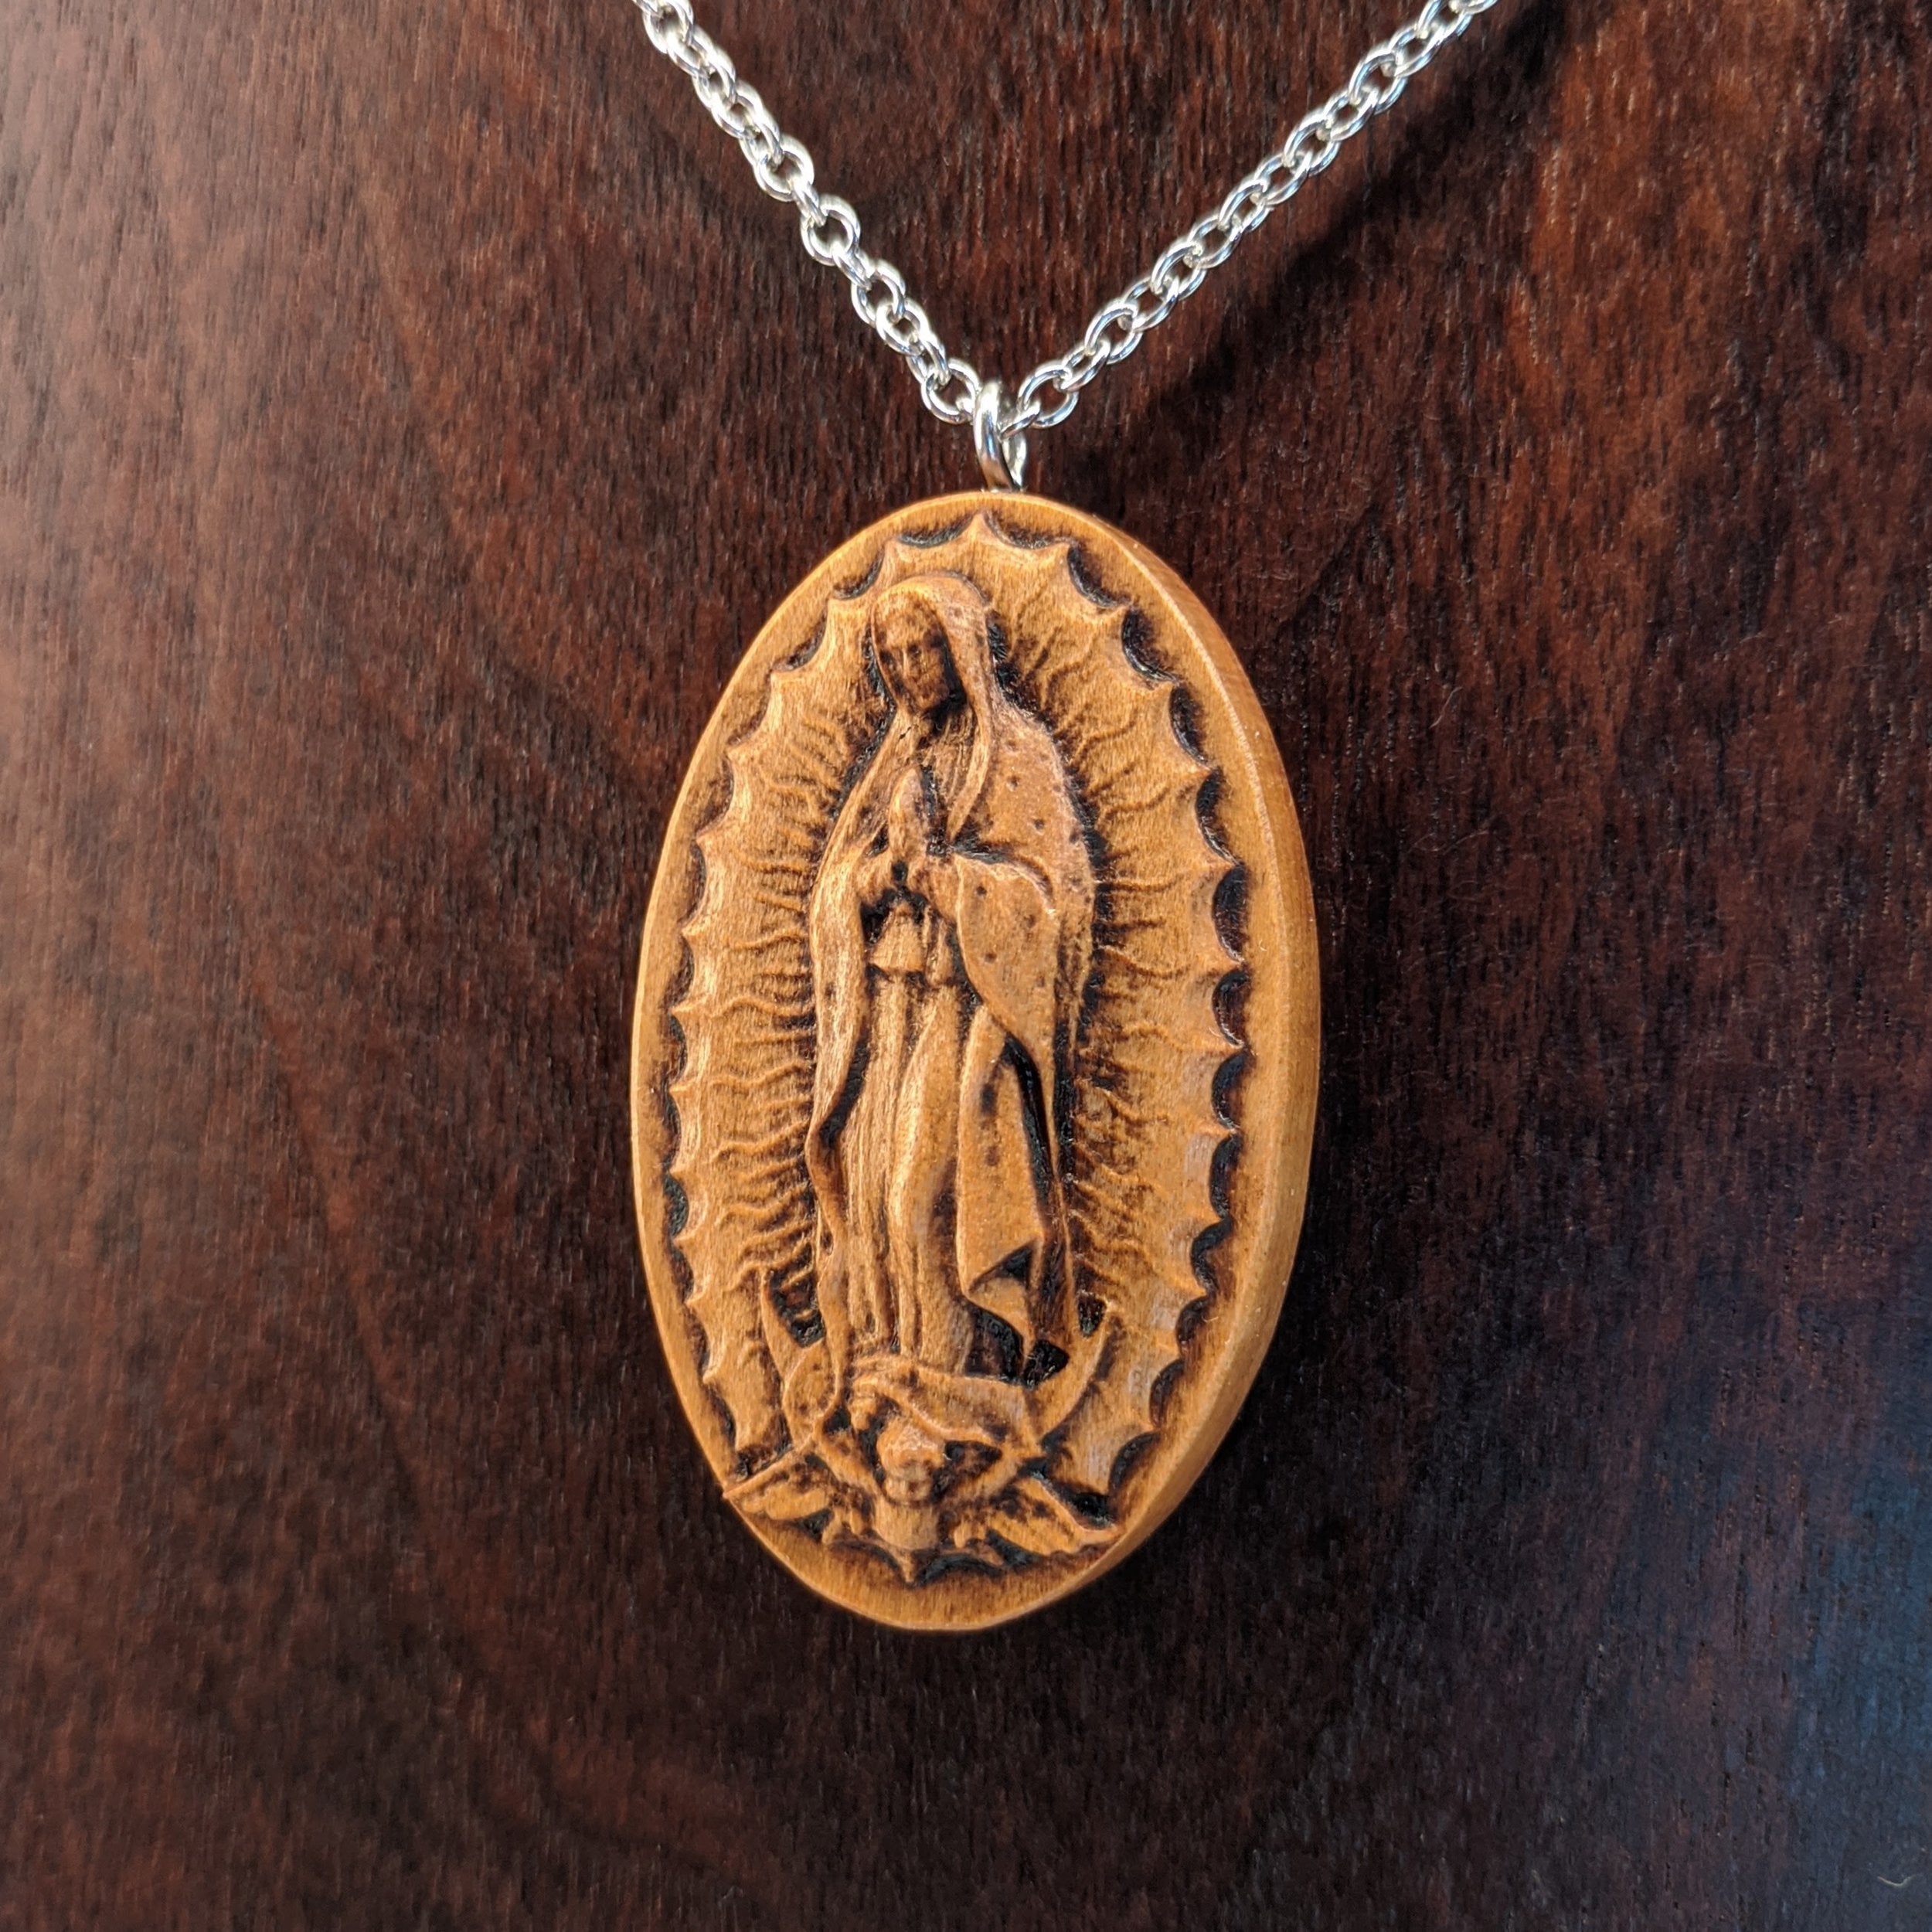 Men's Virgin Mary Pendant 14k Gold Plated Solid 925 Sterling Silver Necklace  | eBay